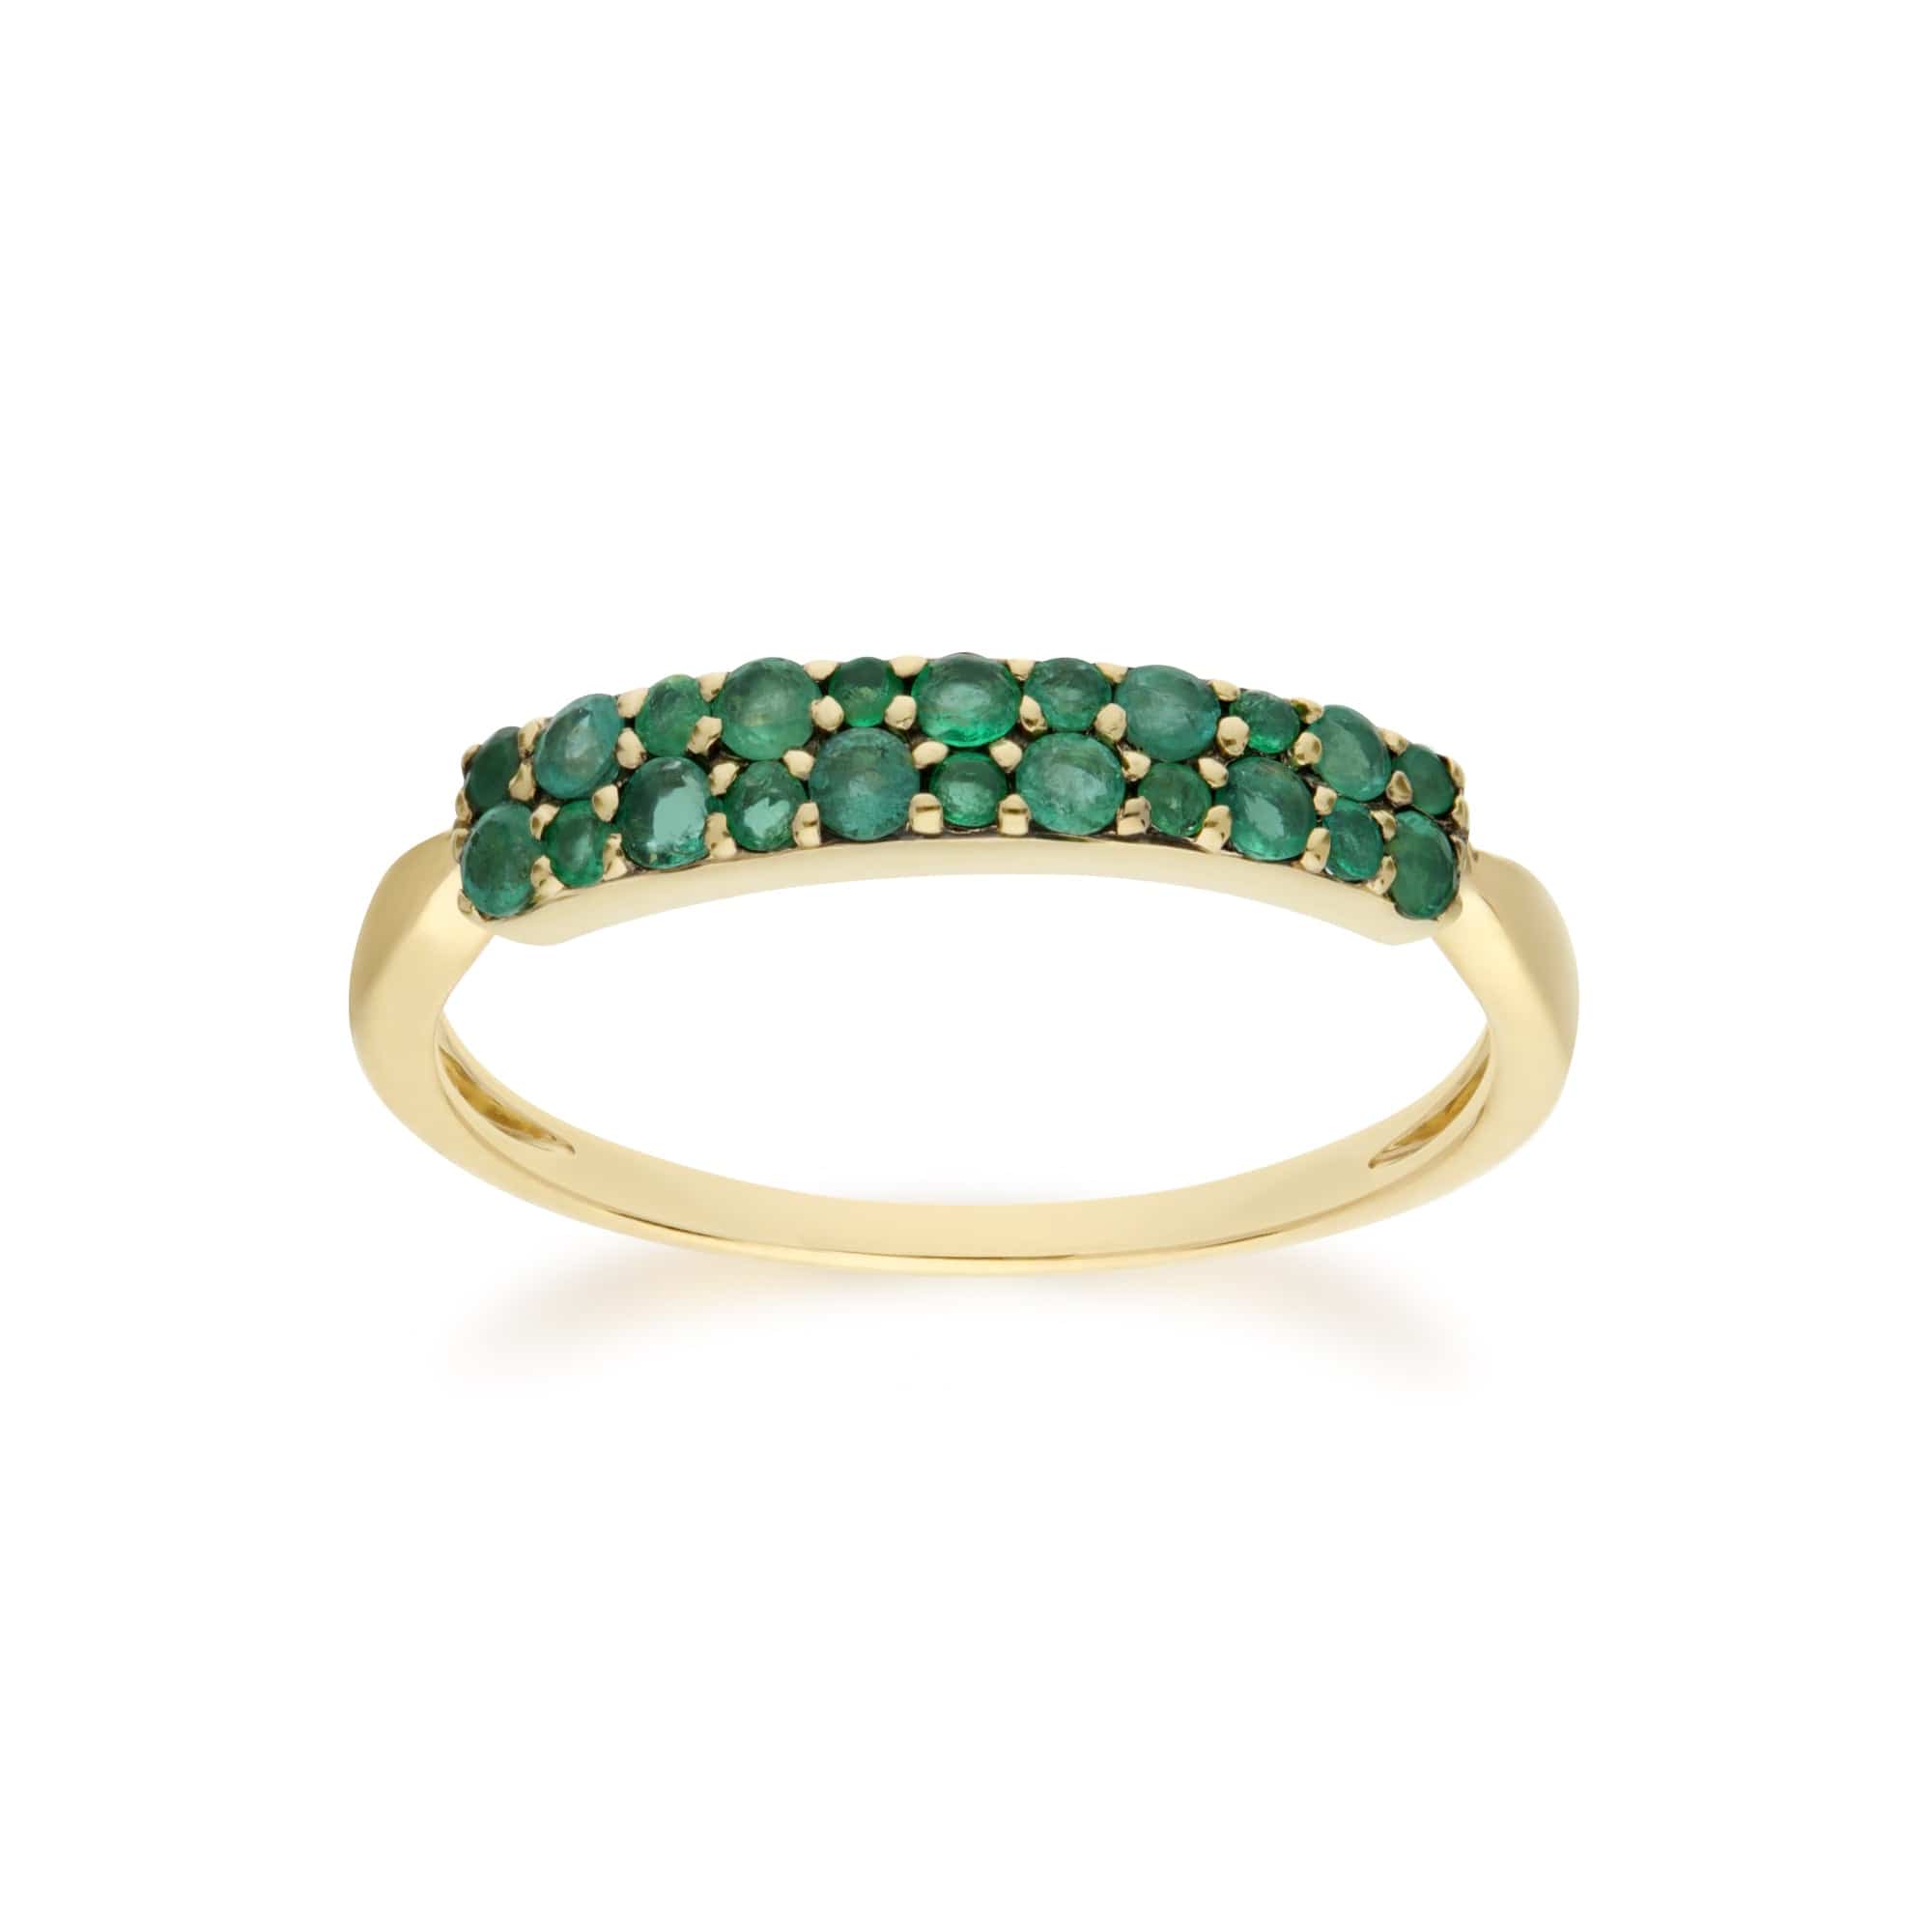 Contemporary 0.4ct Pavé Emerald Cluster Ring in 9ct Yellow Gold - Gemondo